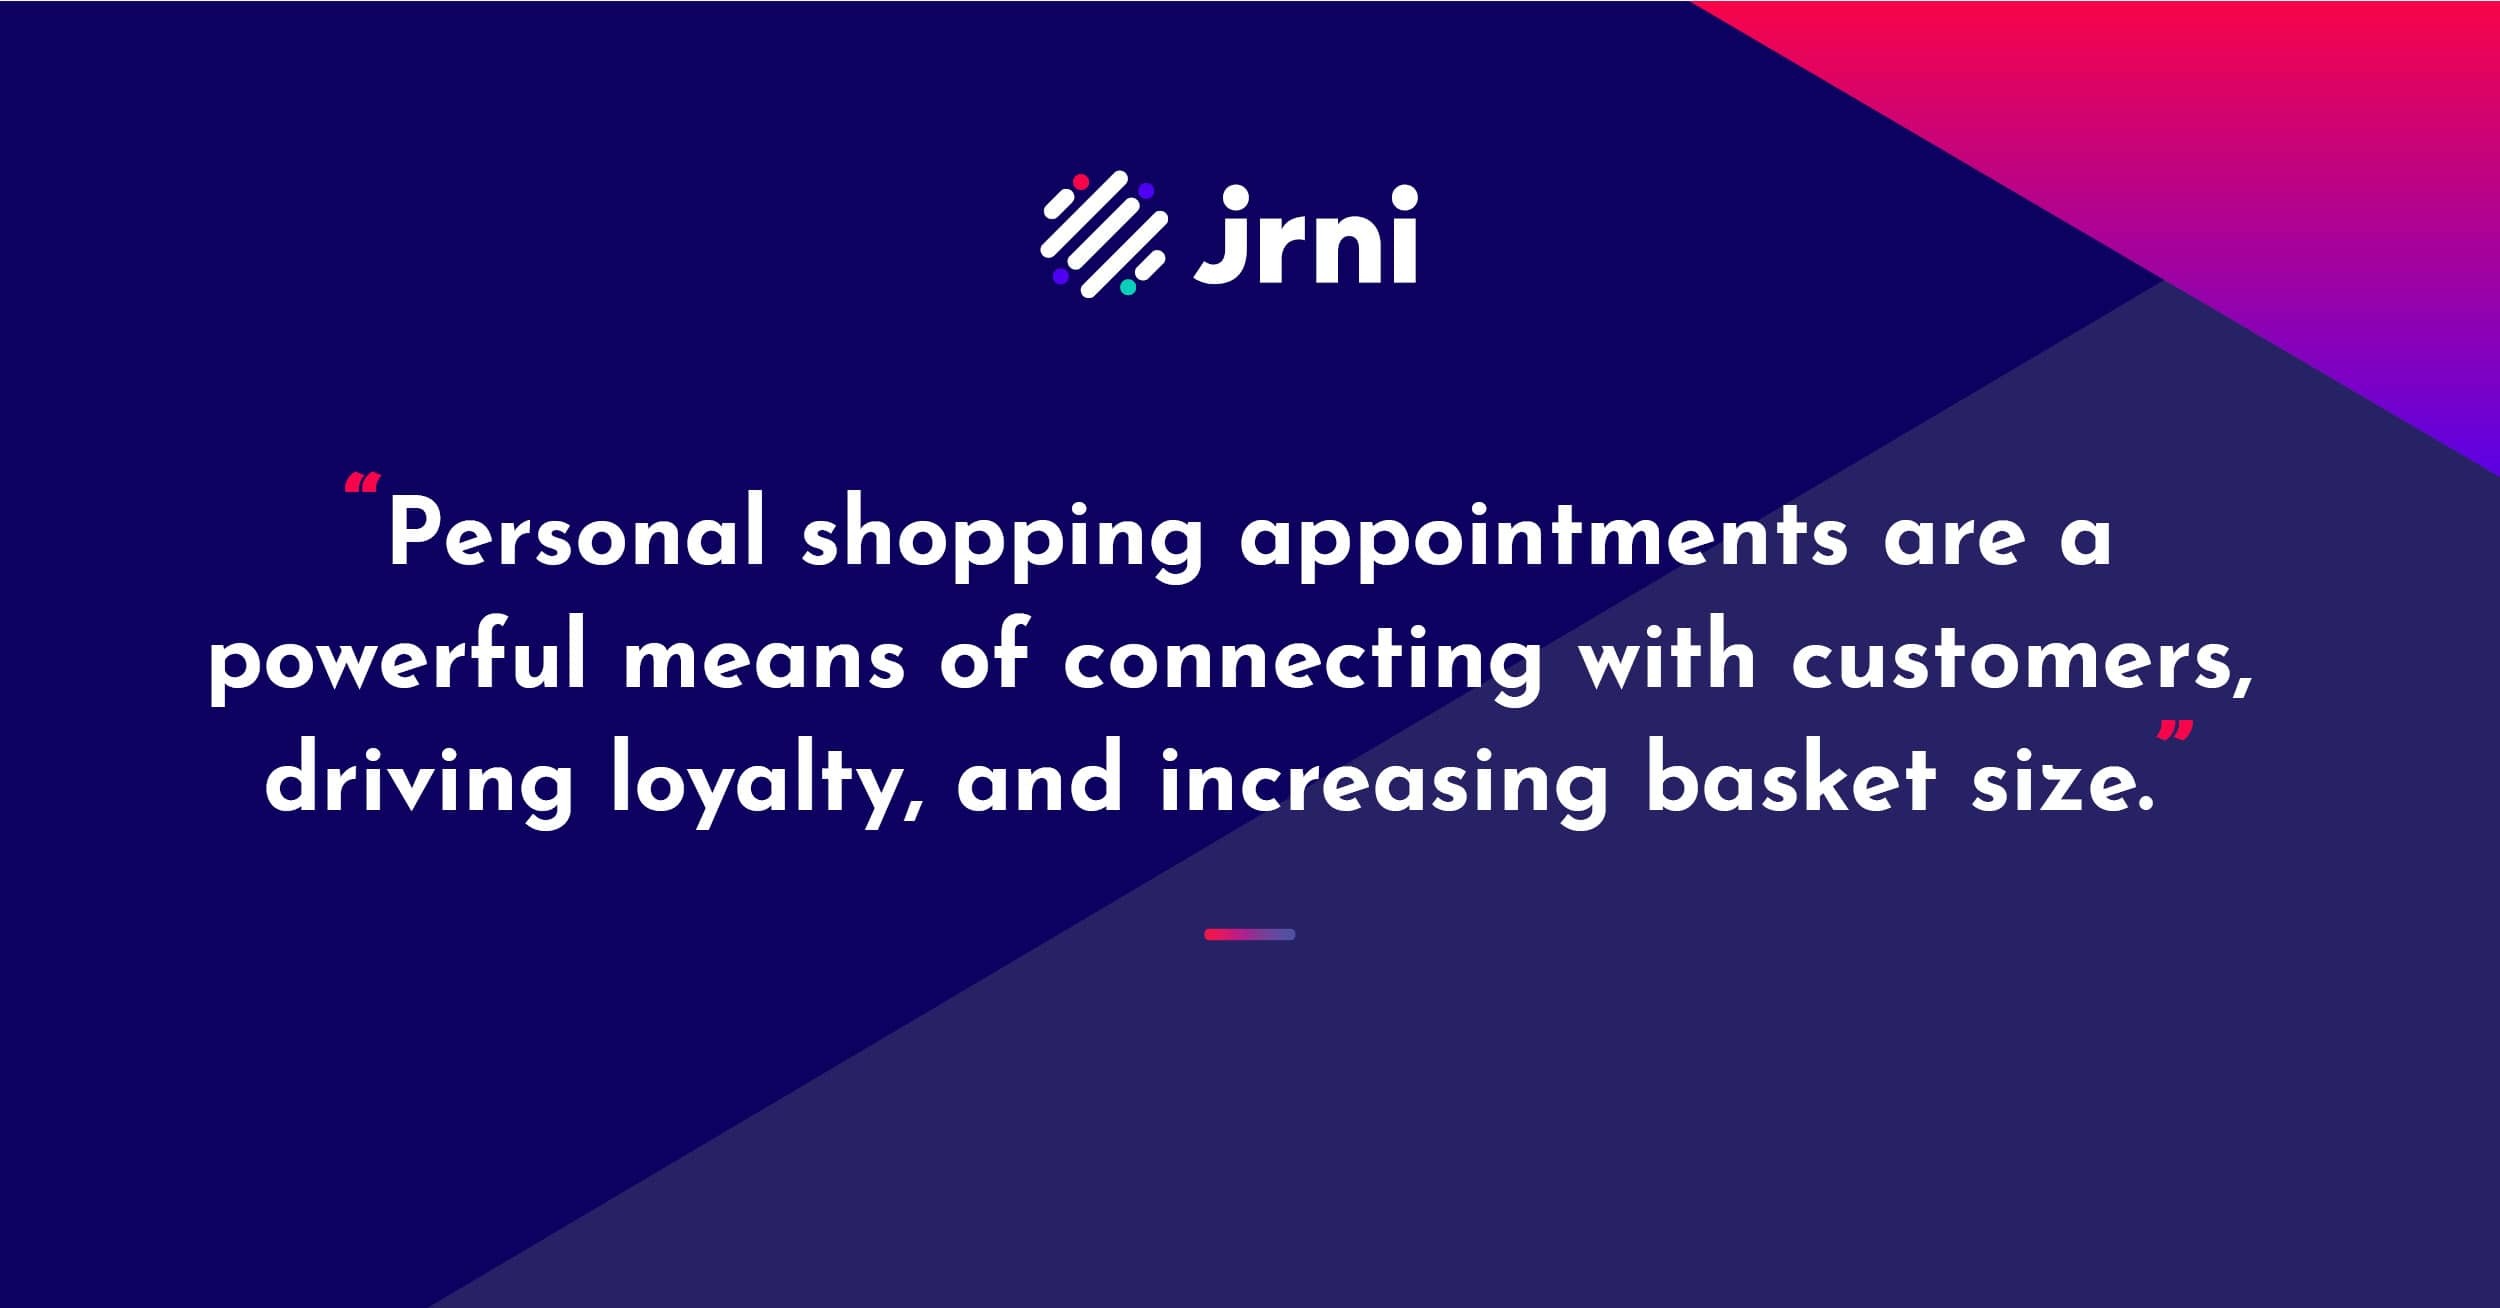 Personal shopping appointments are a powerful means of connecting with customers, driving loyalty, and increasing basket size